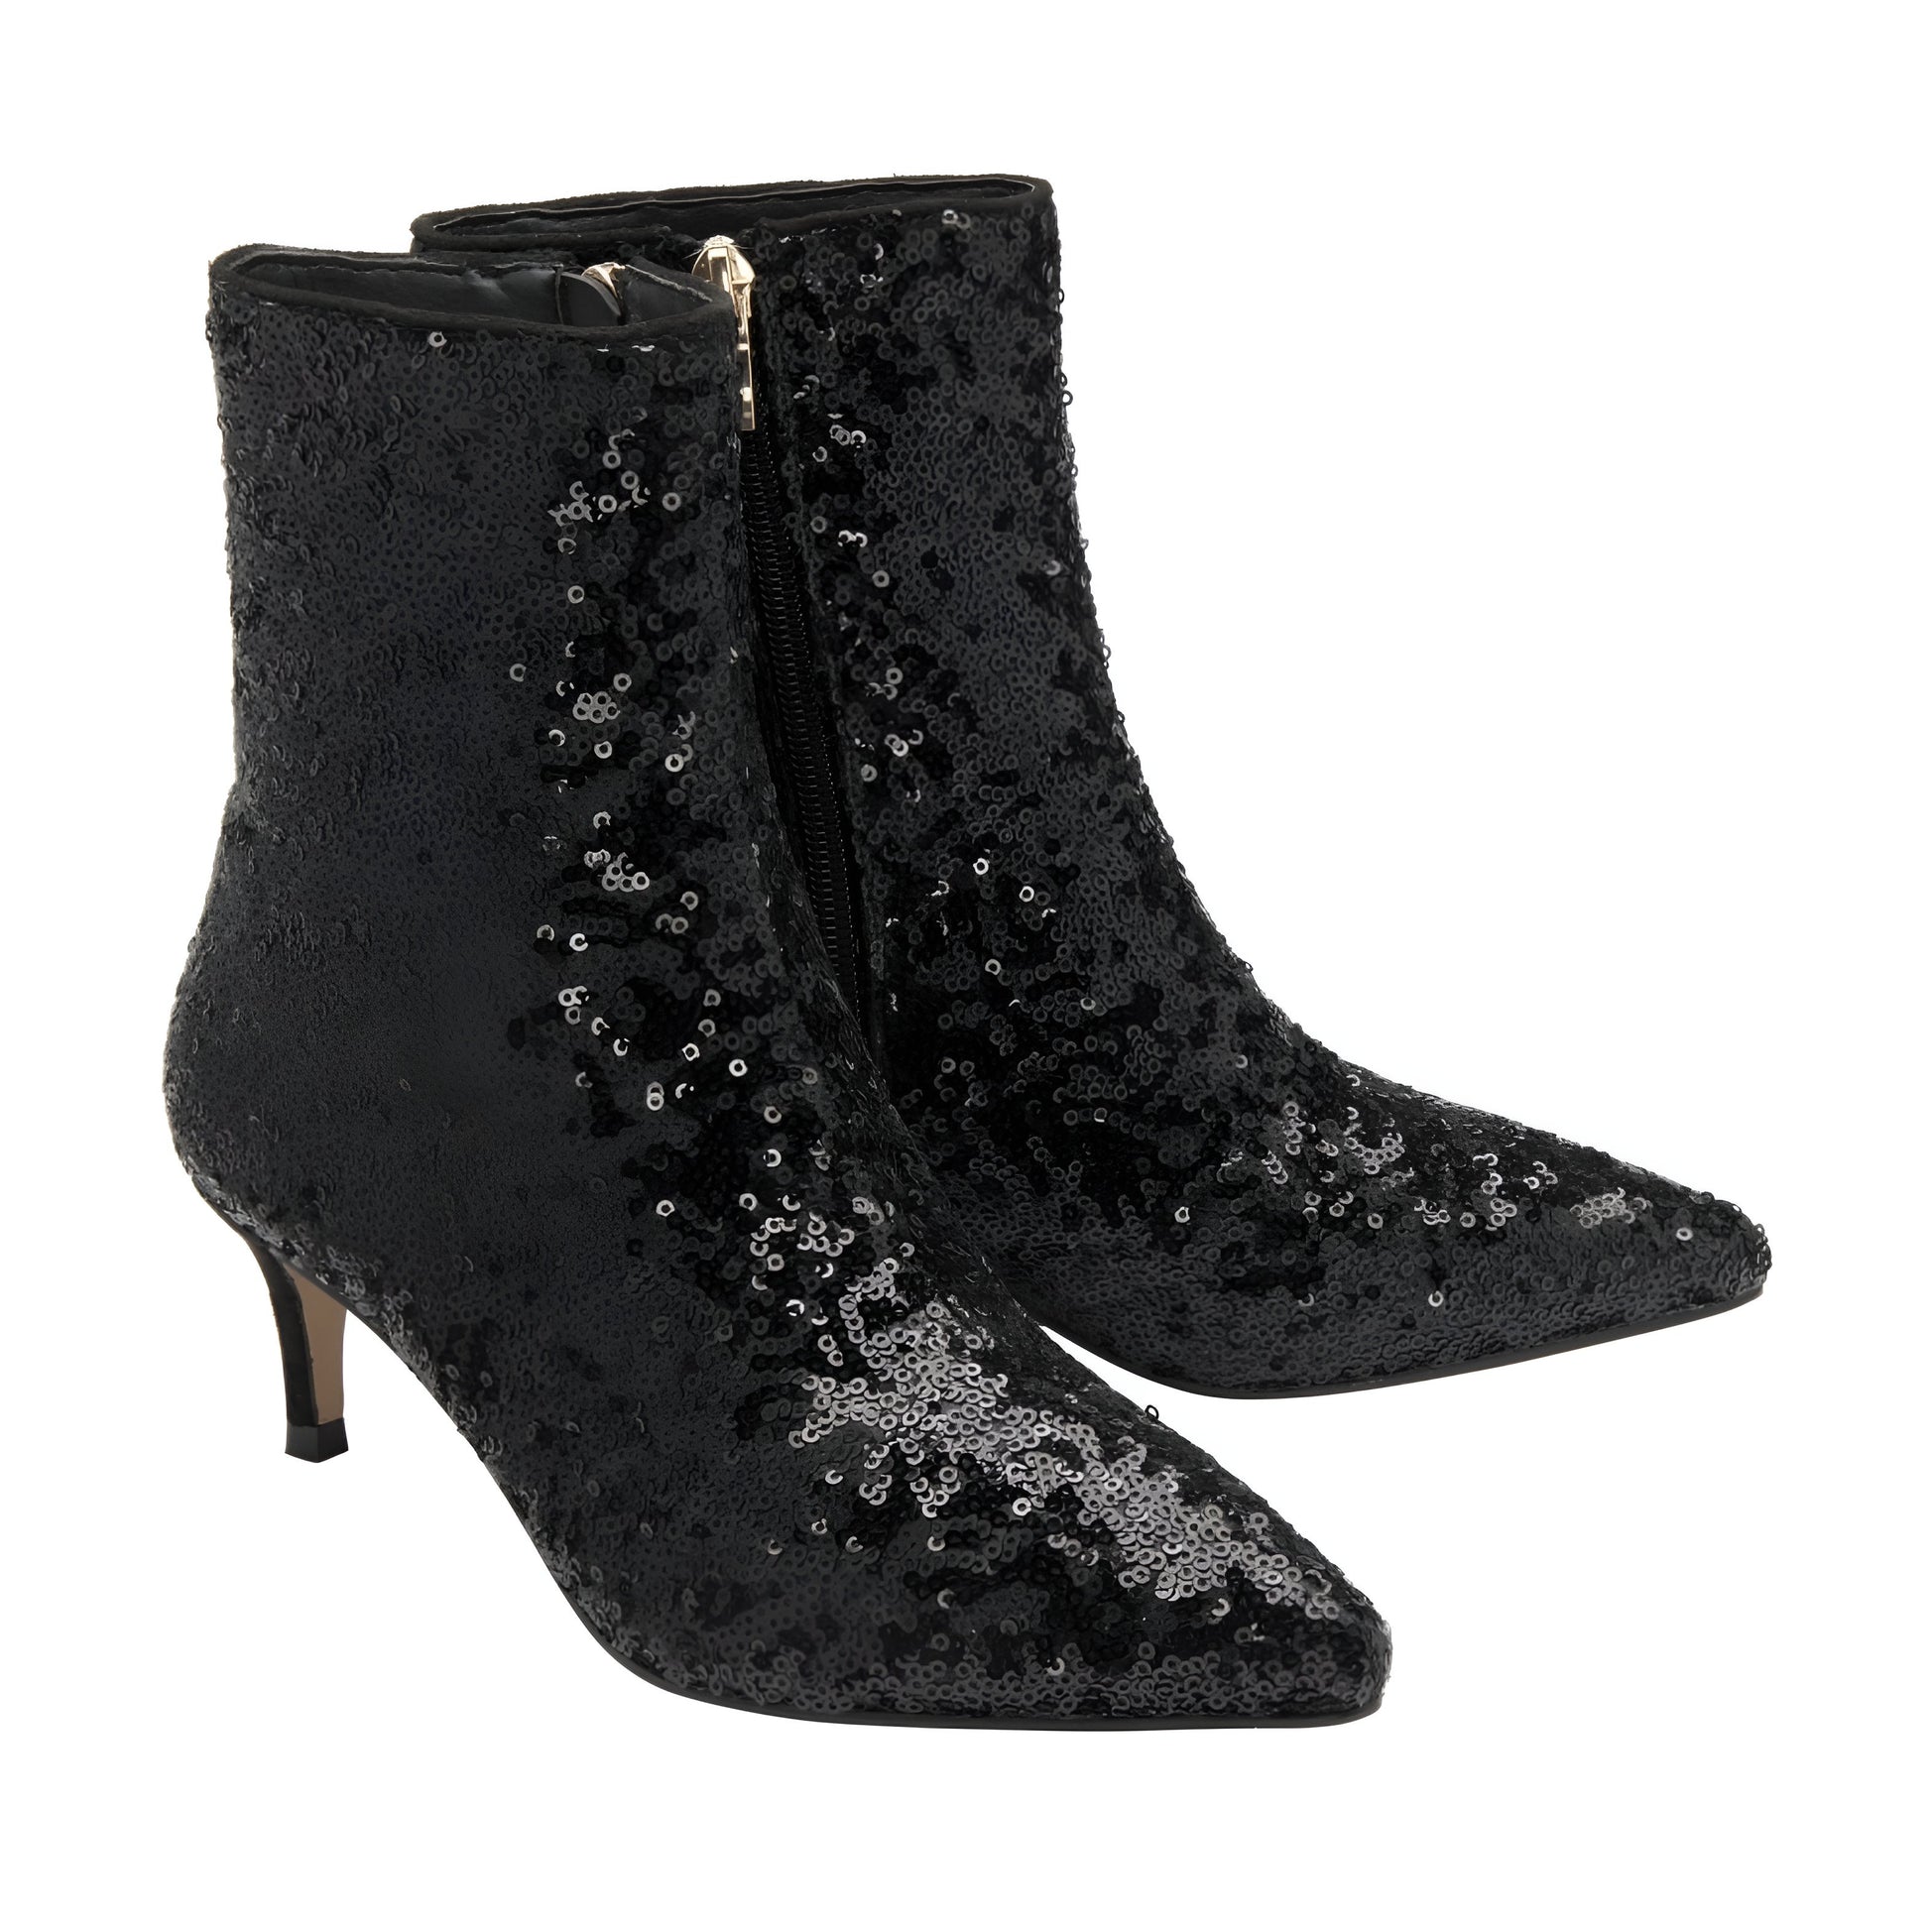 Ravel Black Sequin Currans Pointed-Toe Ankle Boots